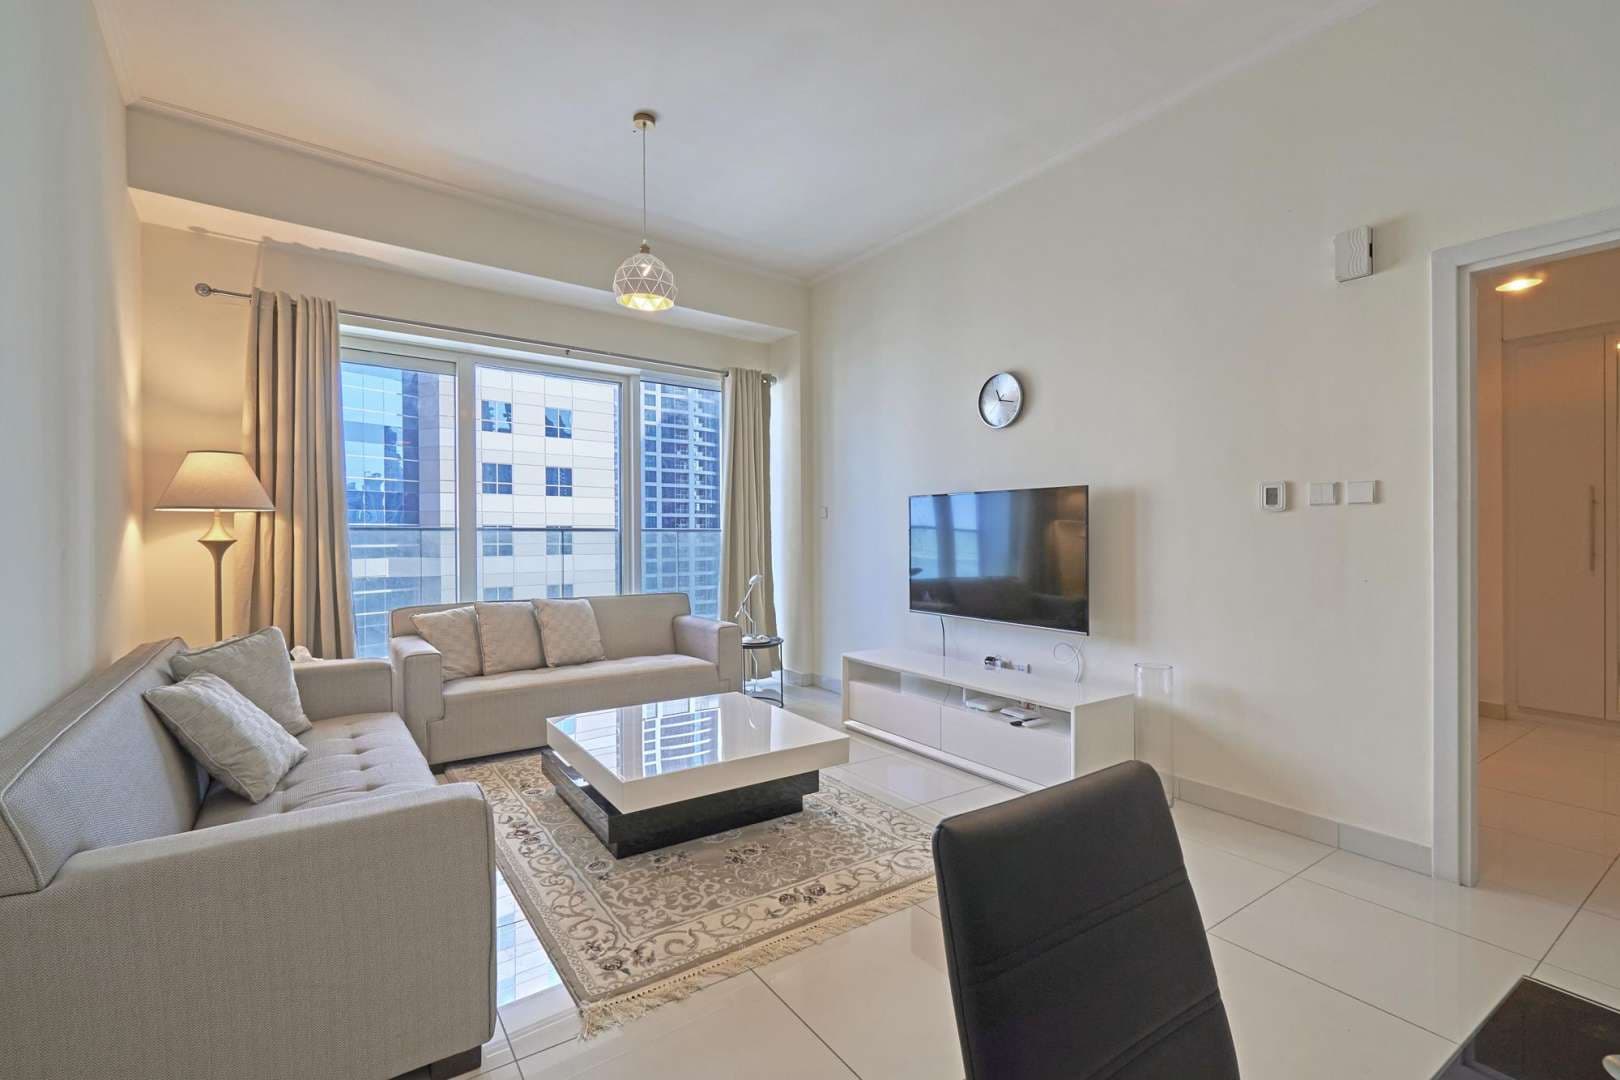 1 Bedroom Apartment For Rent Damac Heights Lp05408 1c55b2ce4be04300.jpg